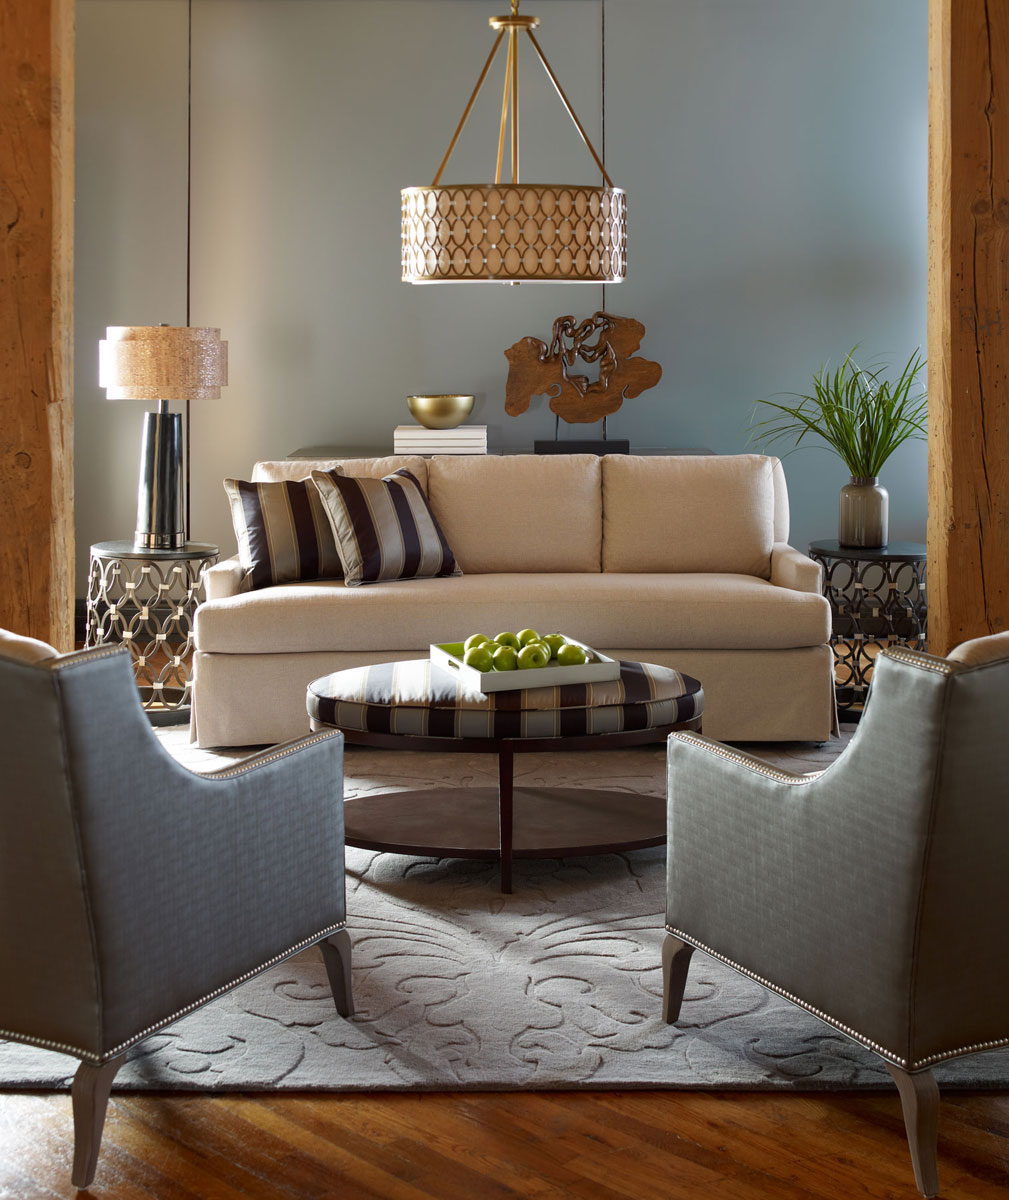 2013 Candice Olson's Living Room Furniture Collection ~ Luxury ...